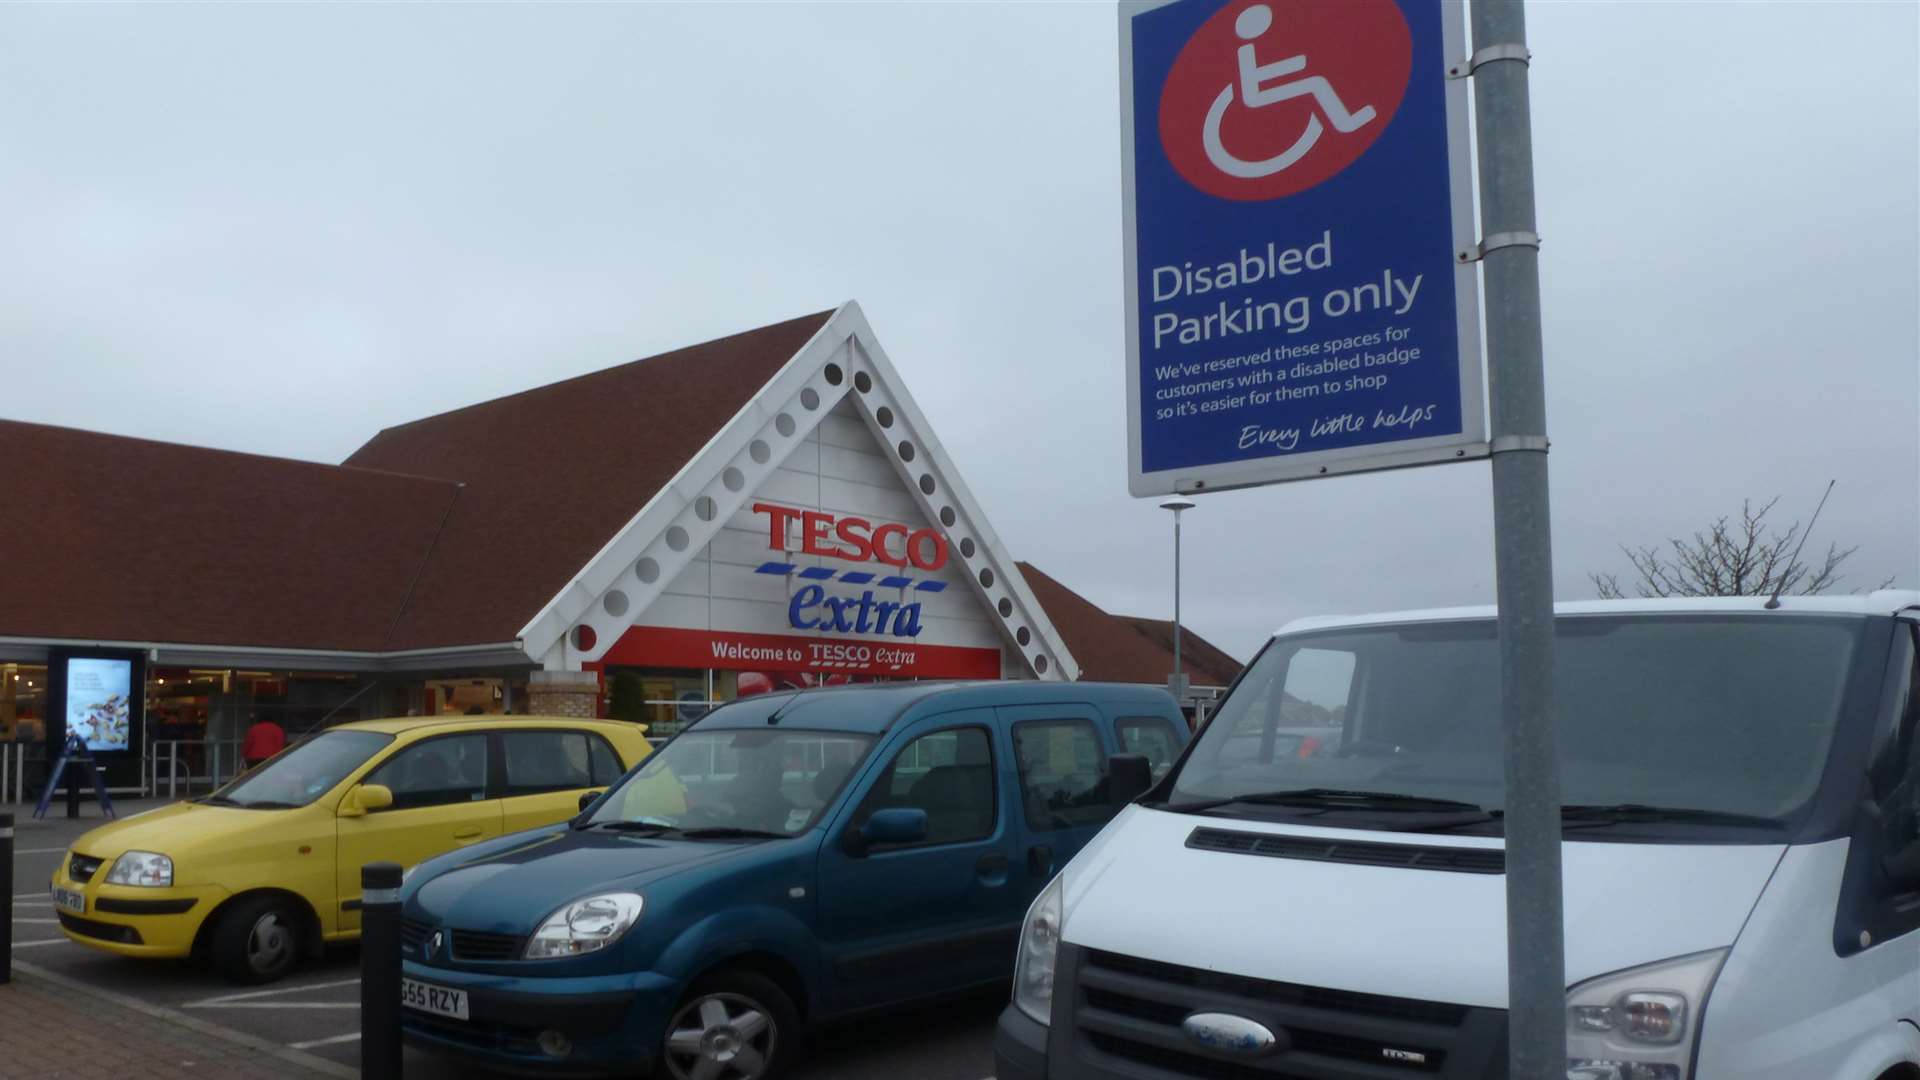 A white van parked in a disabled bay without displaying a blue badge